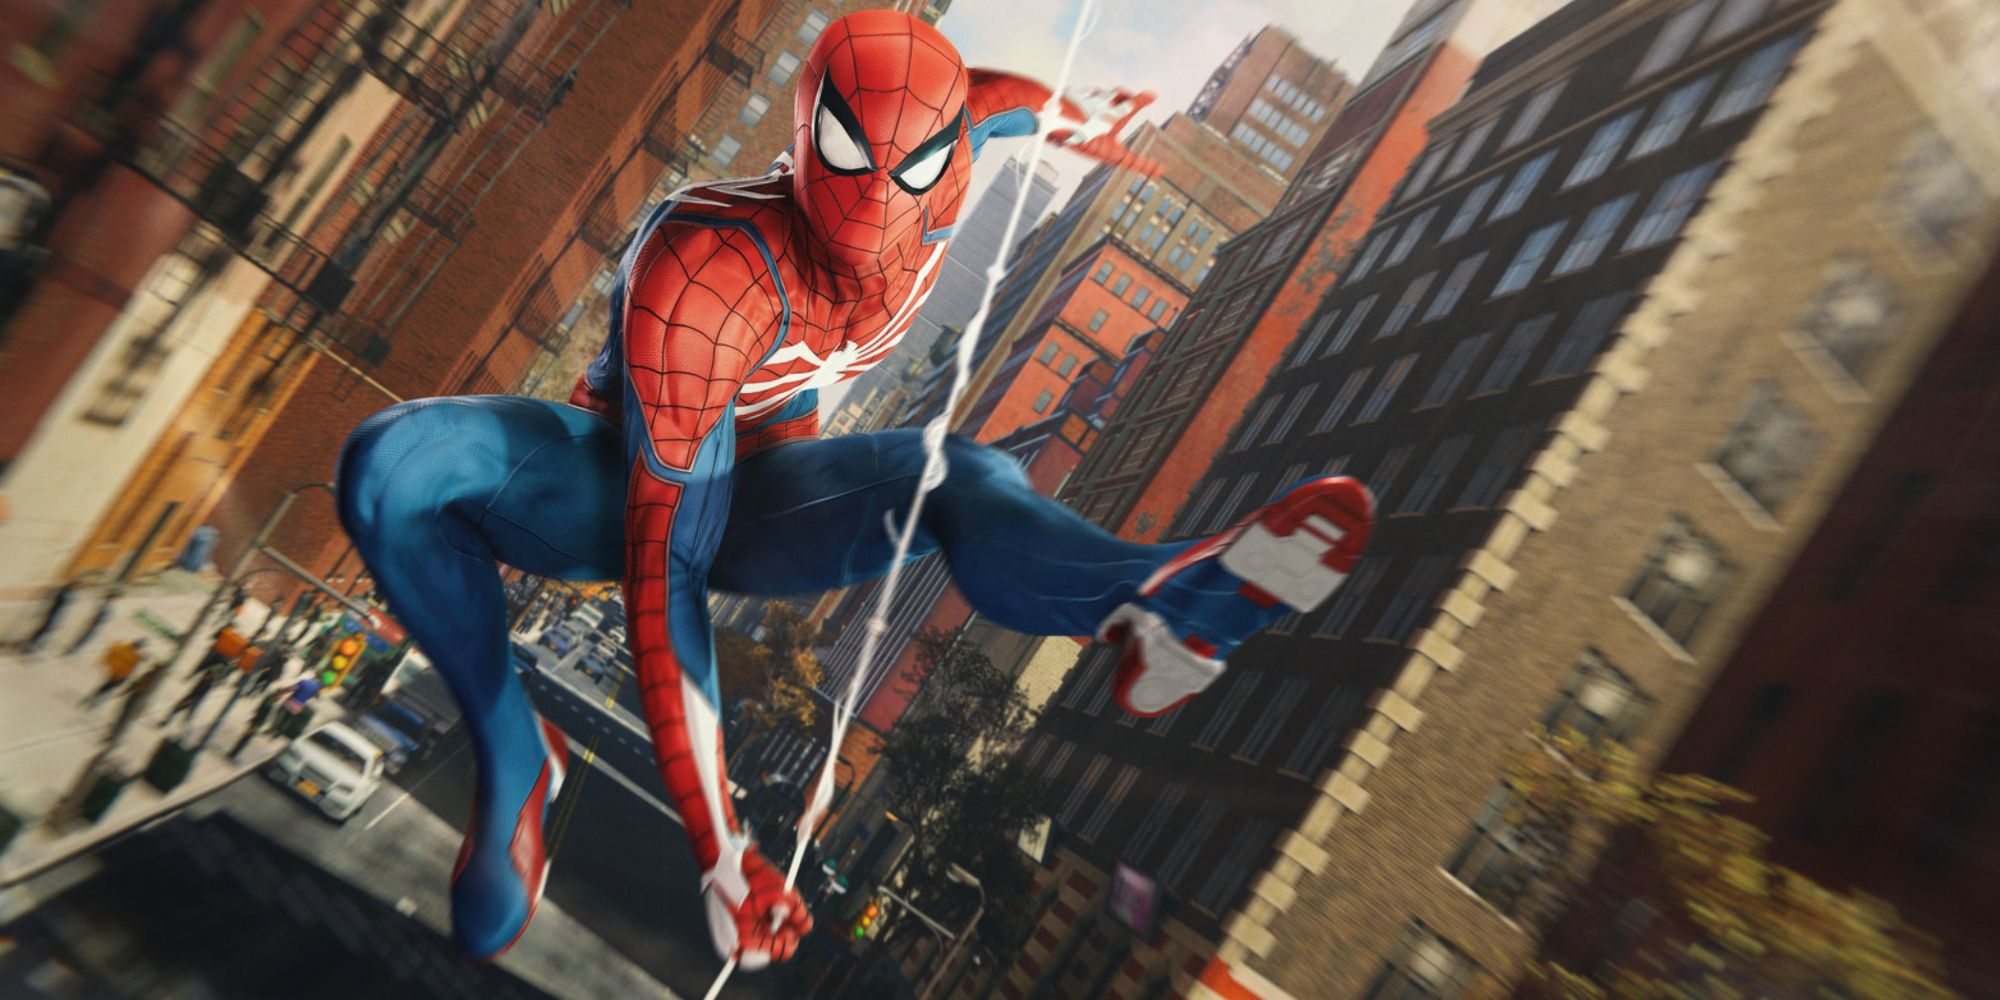 Spider-Man facing the camera and swinging at speed in New York in Marvel's Spider-Man Remastered